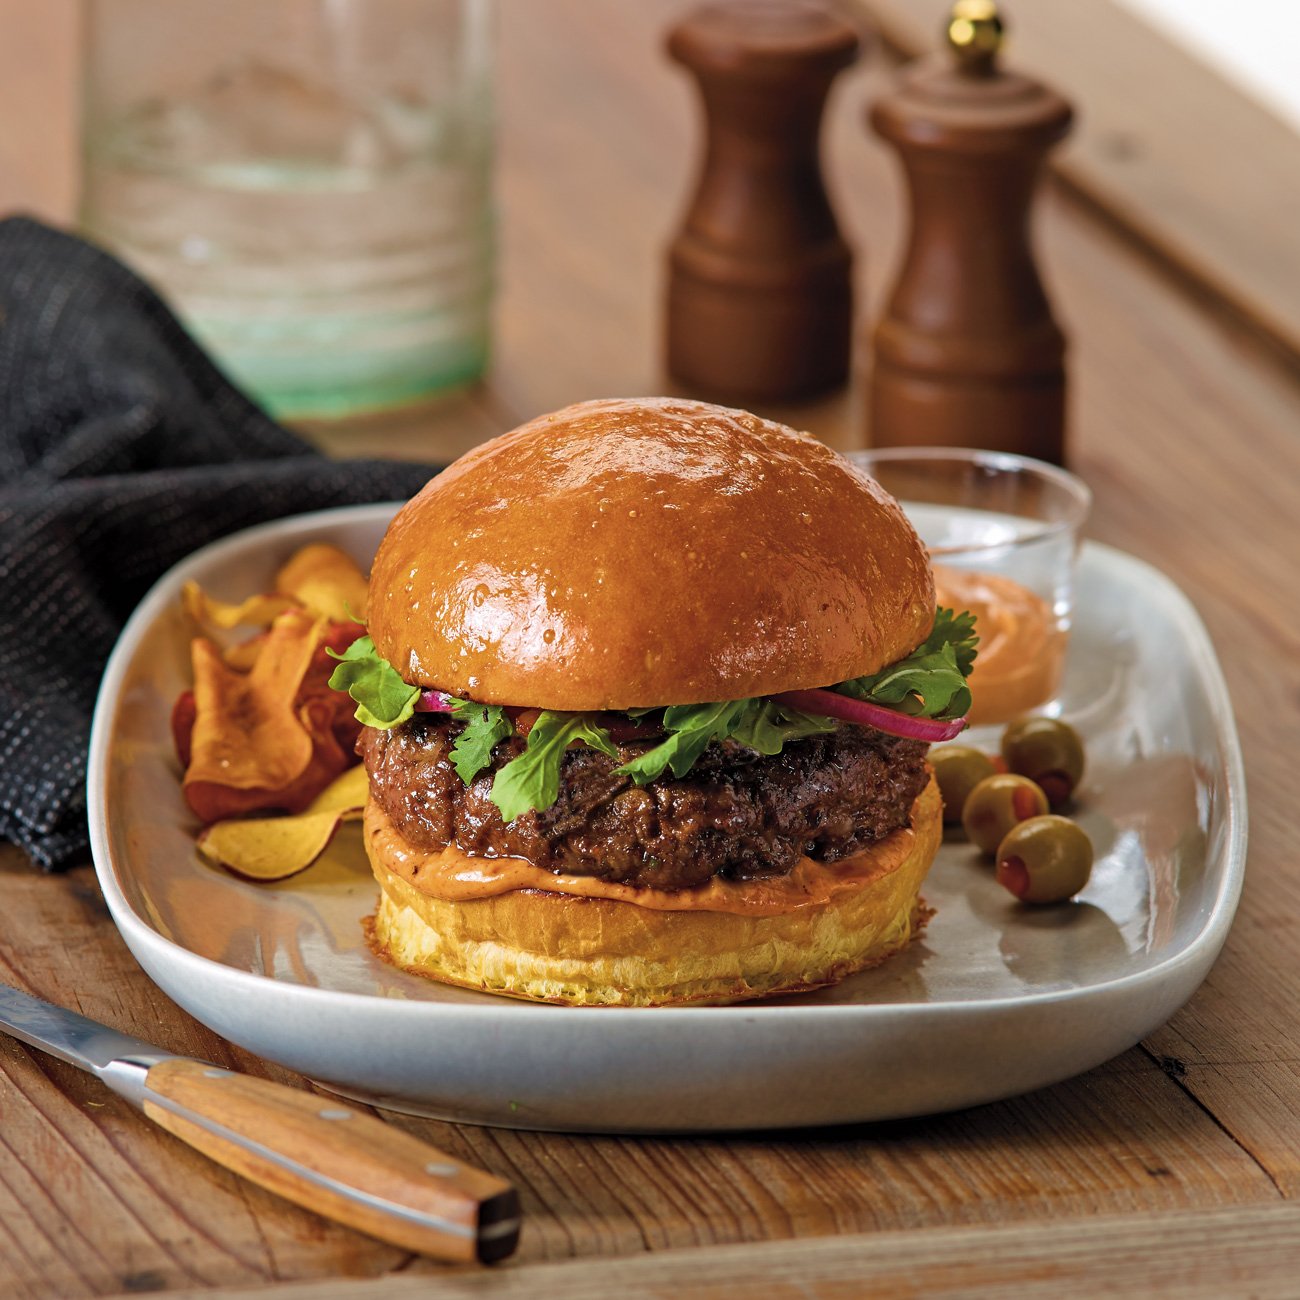 Grilled Bison Burgers With Harissa Aioli Recipe from H-E-B